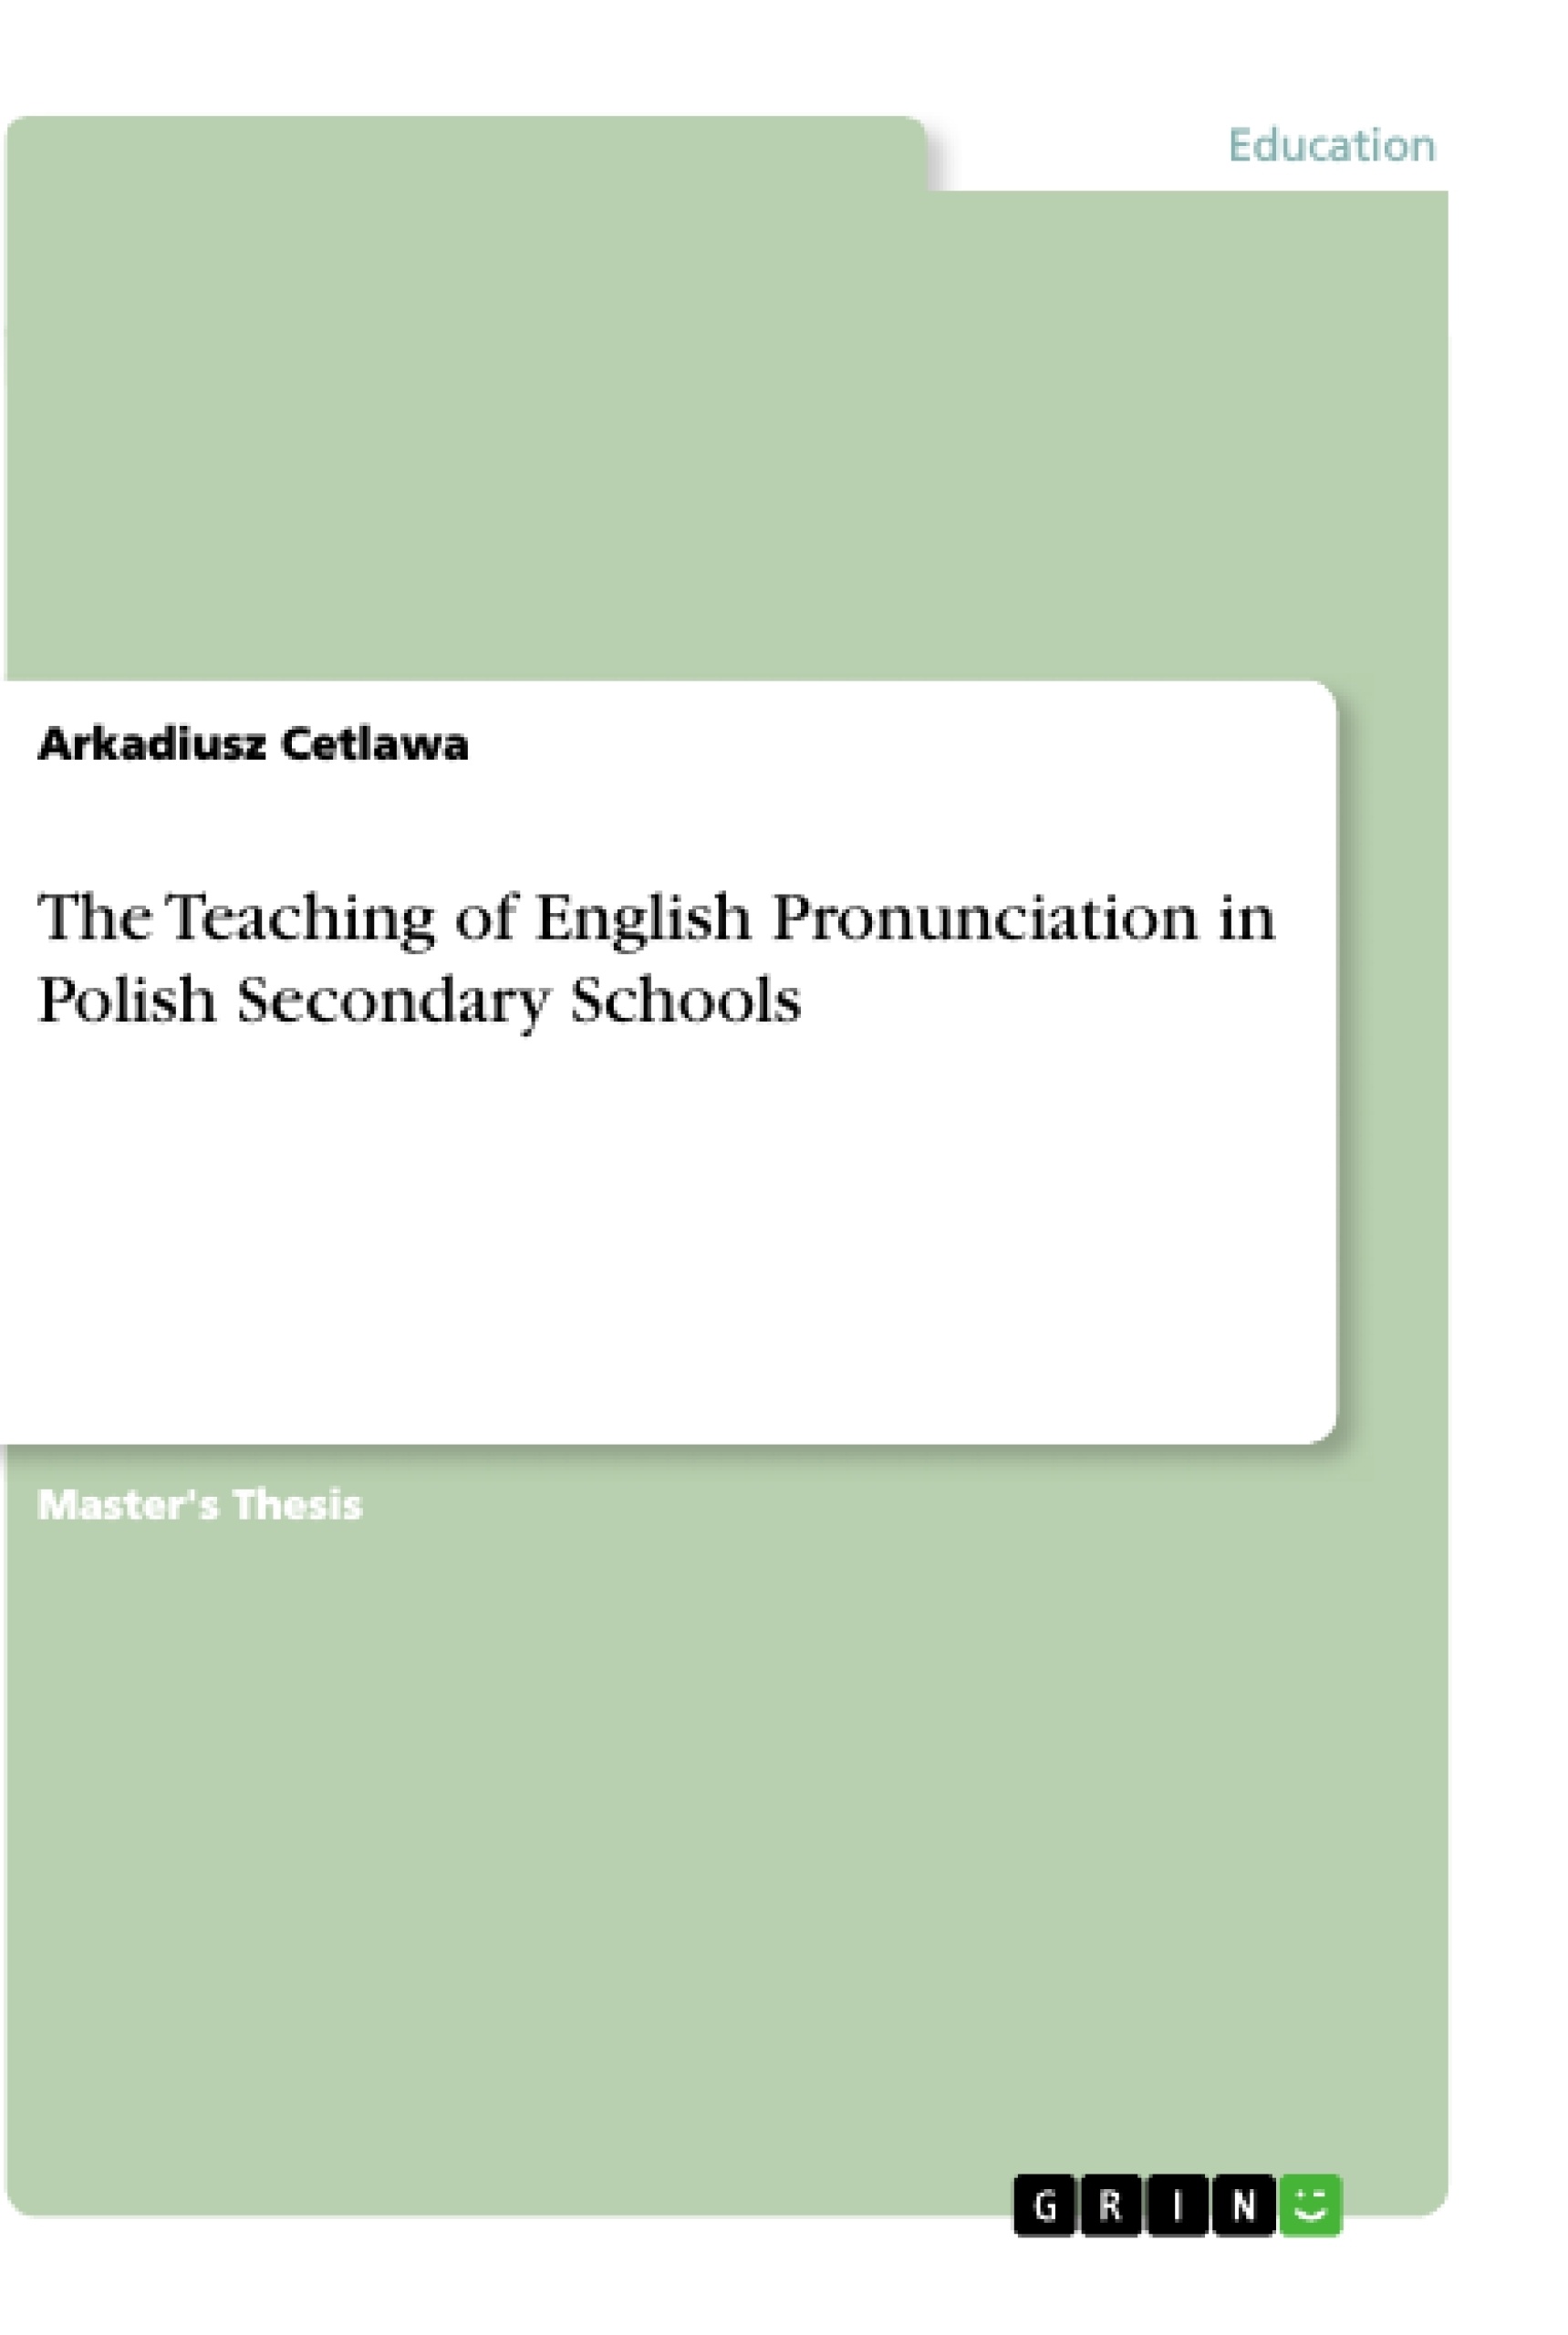 Title: The Teaching of English Pronunciation in Polish Secondary Schools